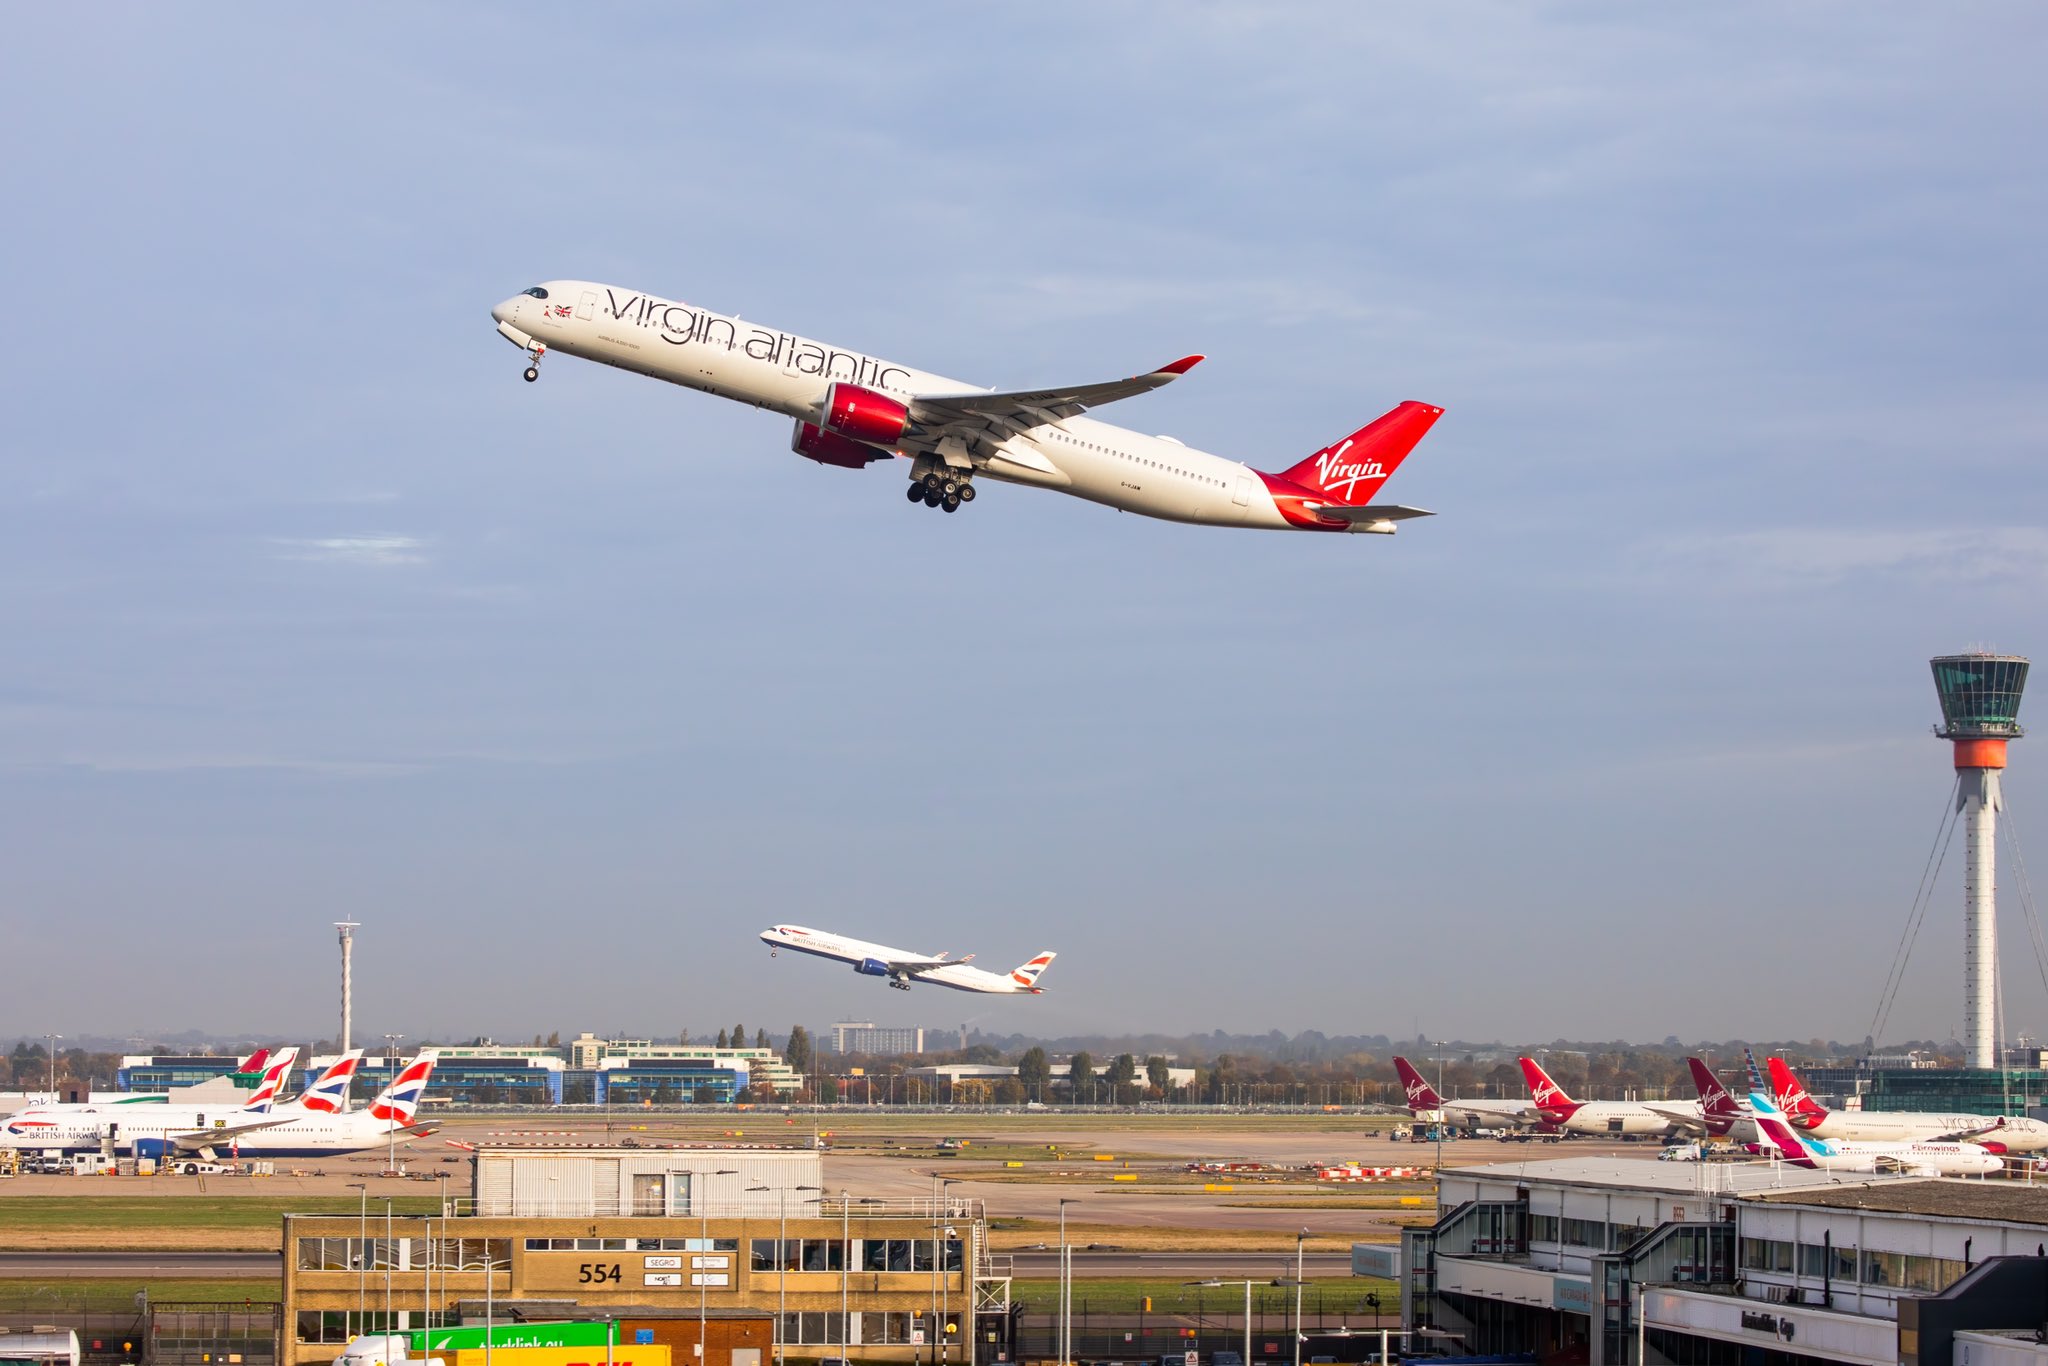 US Opens For Travellers Today – Historic Twin Takeoff London to New York